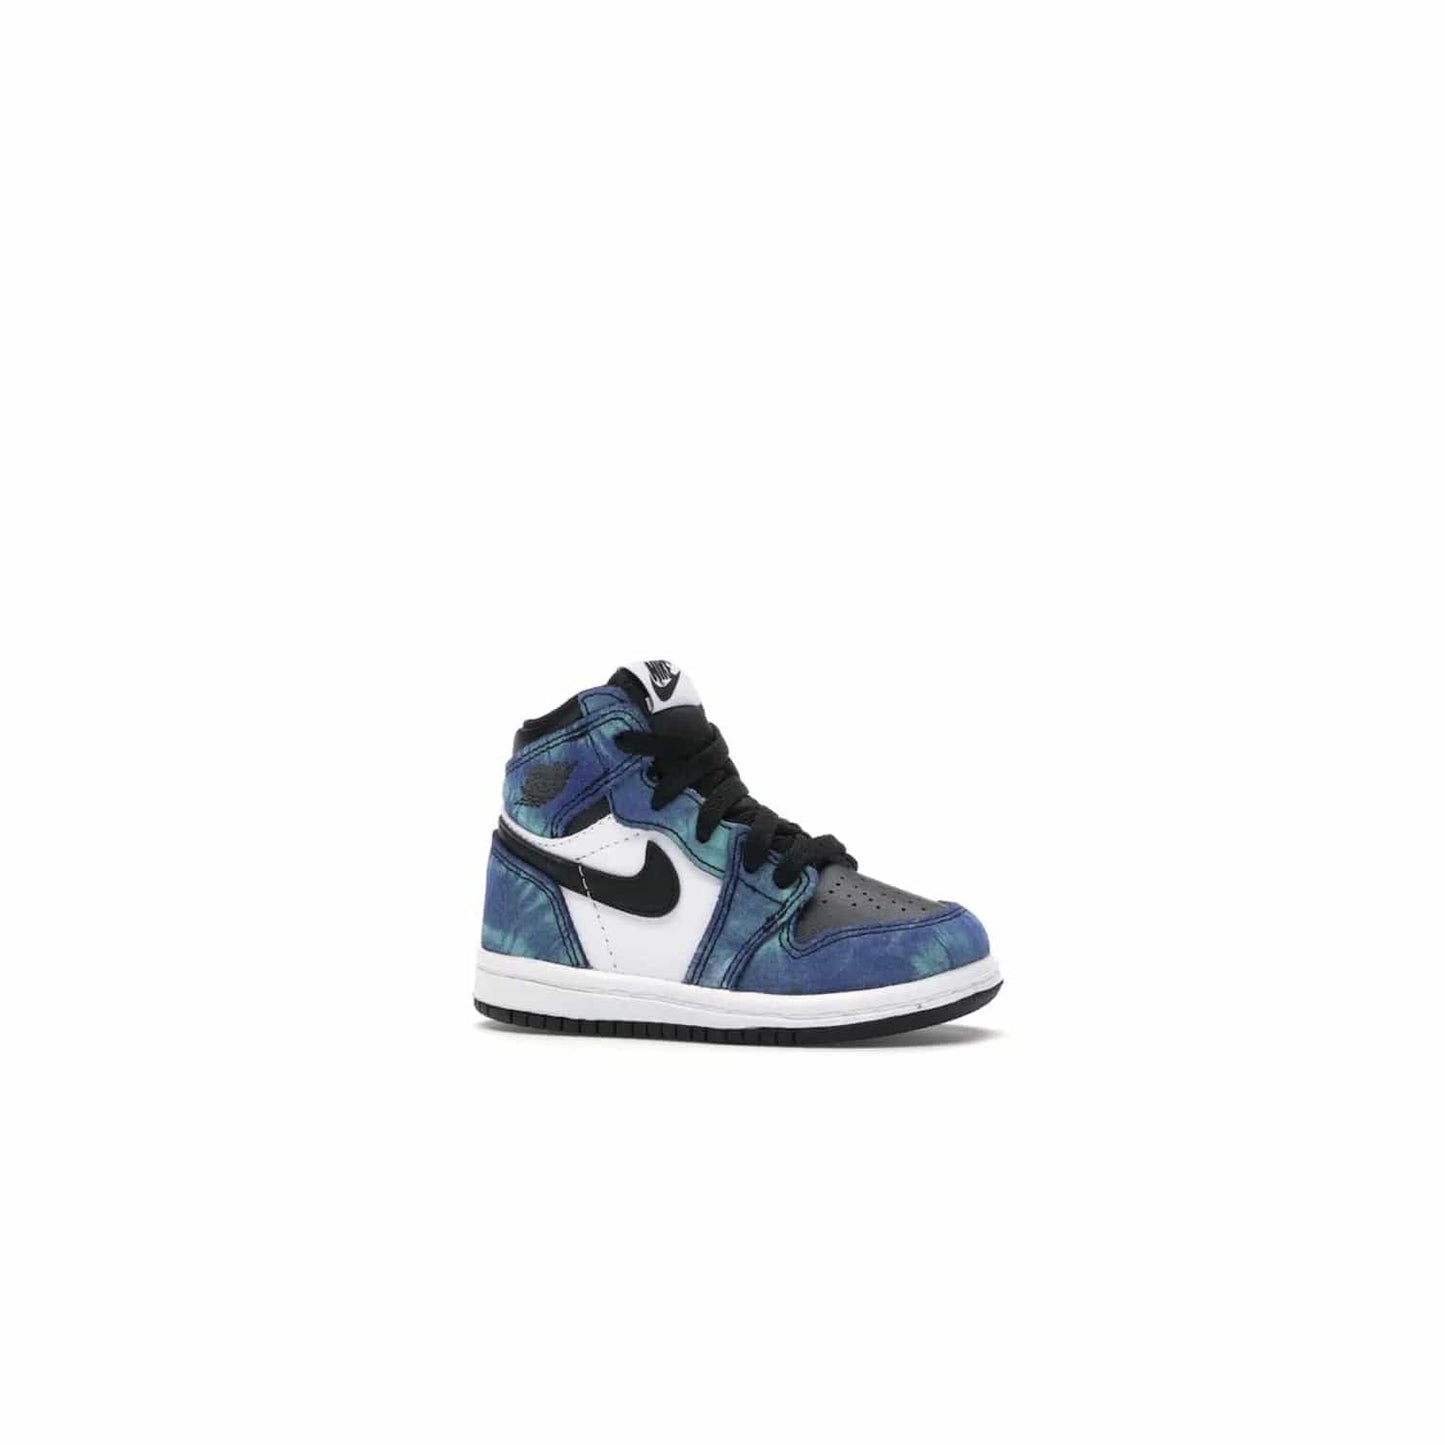 Jordan 1 Retro High Tie Dye (TD) - Image 3 - Only at www.BallersClubKickz.com - Add a unique twist to your sneaker collection with the Jordan 1 Retro High Tie Dye (TD). Classic Air Jordan 1 details like toe box perforations and the signature Swoosh logo on the sidewall are topped with an eye-catching tie dye design that’s perfect for styling all year round.